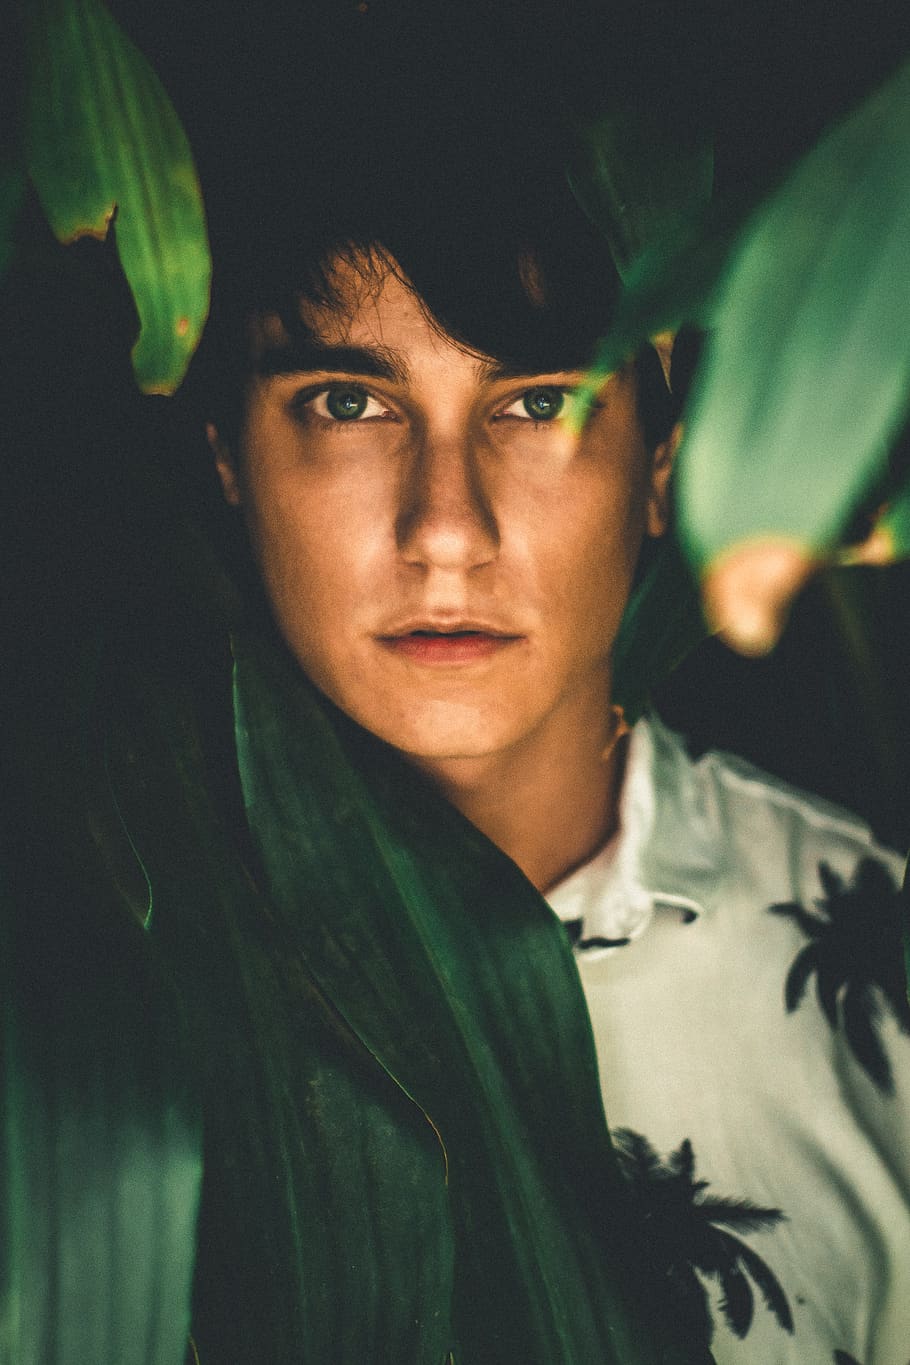 Man in White Collared Shirt Surround by Leaves on Focus Photography